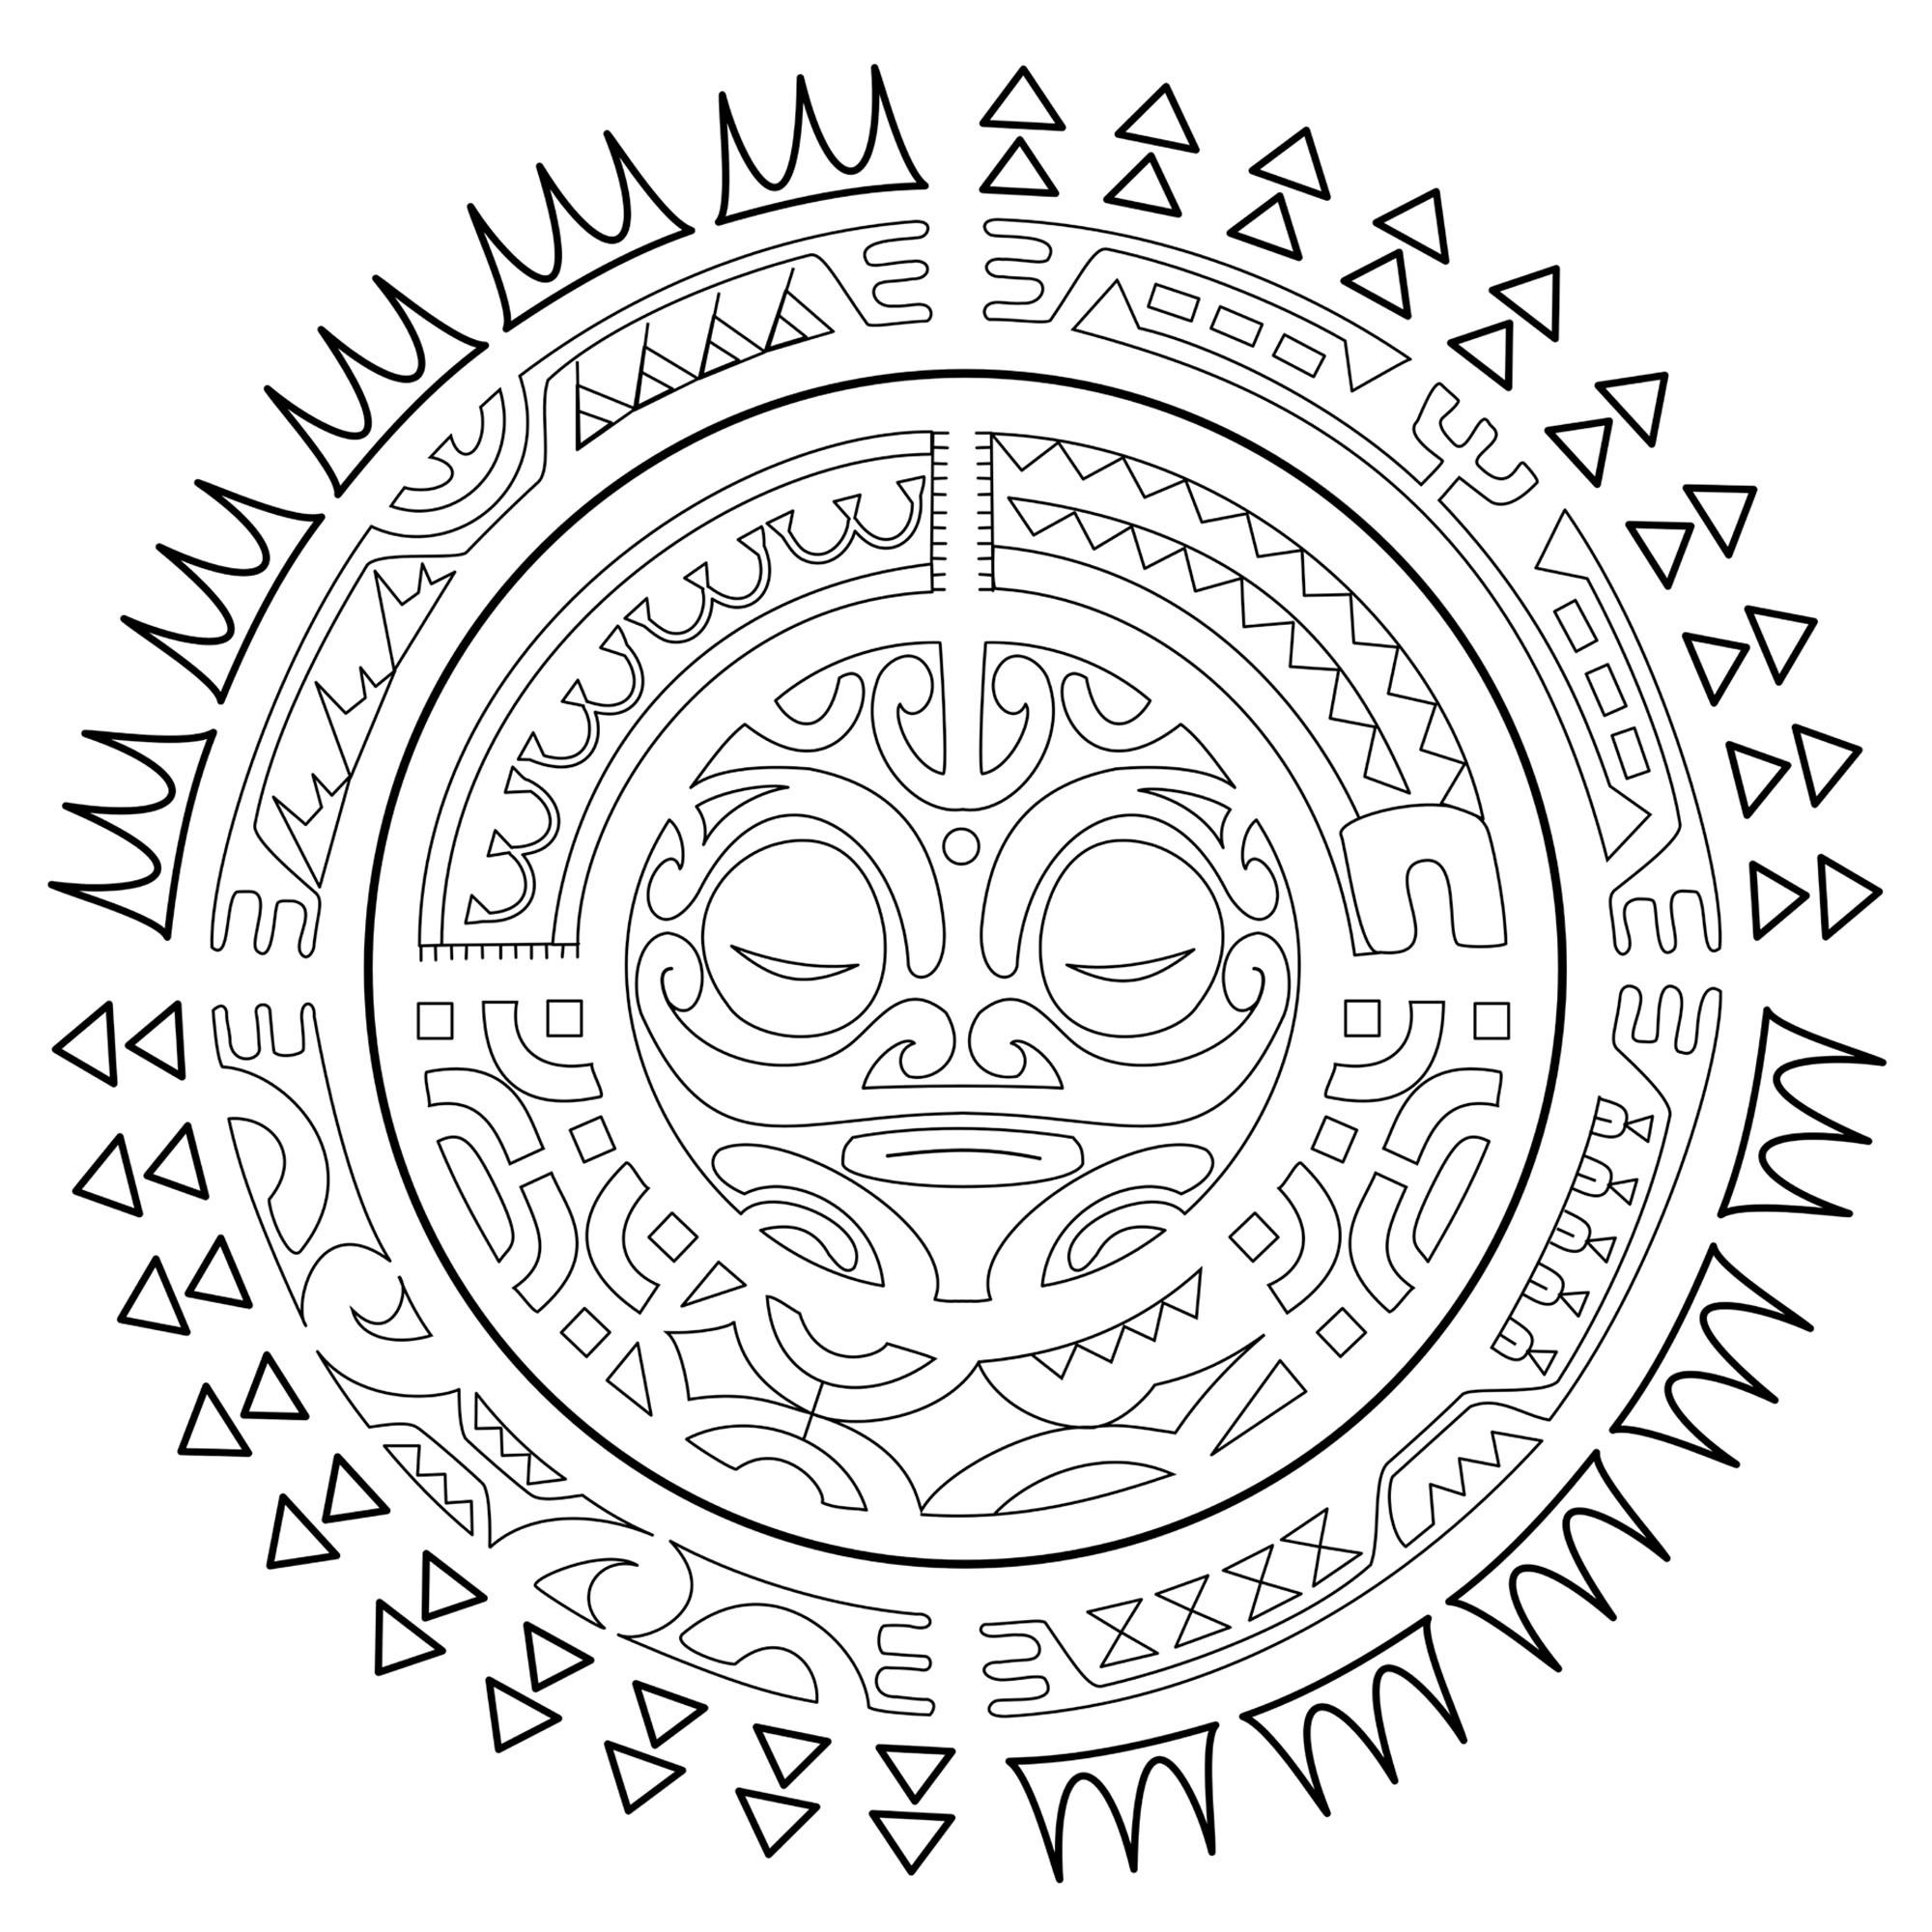 The sun is a universal symbol of eternity and life. In Polynesian cultures it is also regarded as a symbol of health, welfare, success, joy, purity, and fertility. It’s considered a male symbol, associated with fire. The rising sun symbolizes a fresh start, new life, and growth, while the setting sun can be a symbol of rest and peace, with the continuous cycle of day and night symbolizing eternity. The sun in this tattoo is a symbol of protection, like the guardian tiki in the center of the design. The elements surrounding it represent protection from adversities (symbolized by the moray eel), cooperation, strength, and good luck in order to achieve stability, prosperity, and unity.  From the book Polynesian Tattoos: 42 Modern Tribal Designs to Color and Explore by Italian tattoo artist and author, Roberto “GiErre” Gemori. Product page : www.shambhala.com/polynesian-tattoos.html Author’s website: Tattootribes.com